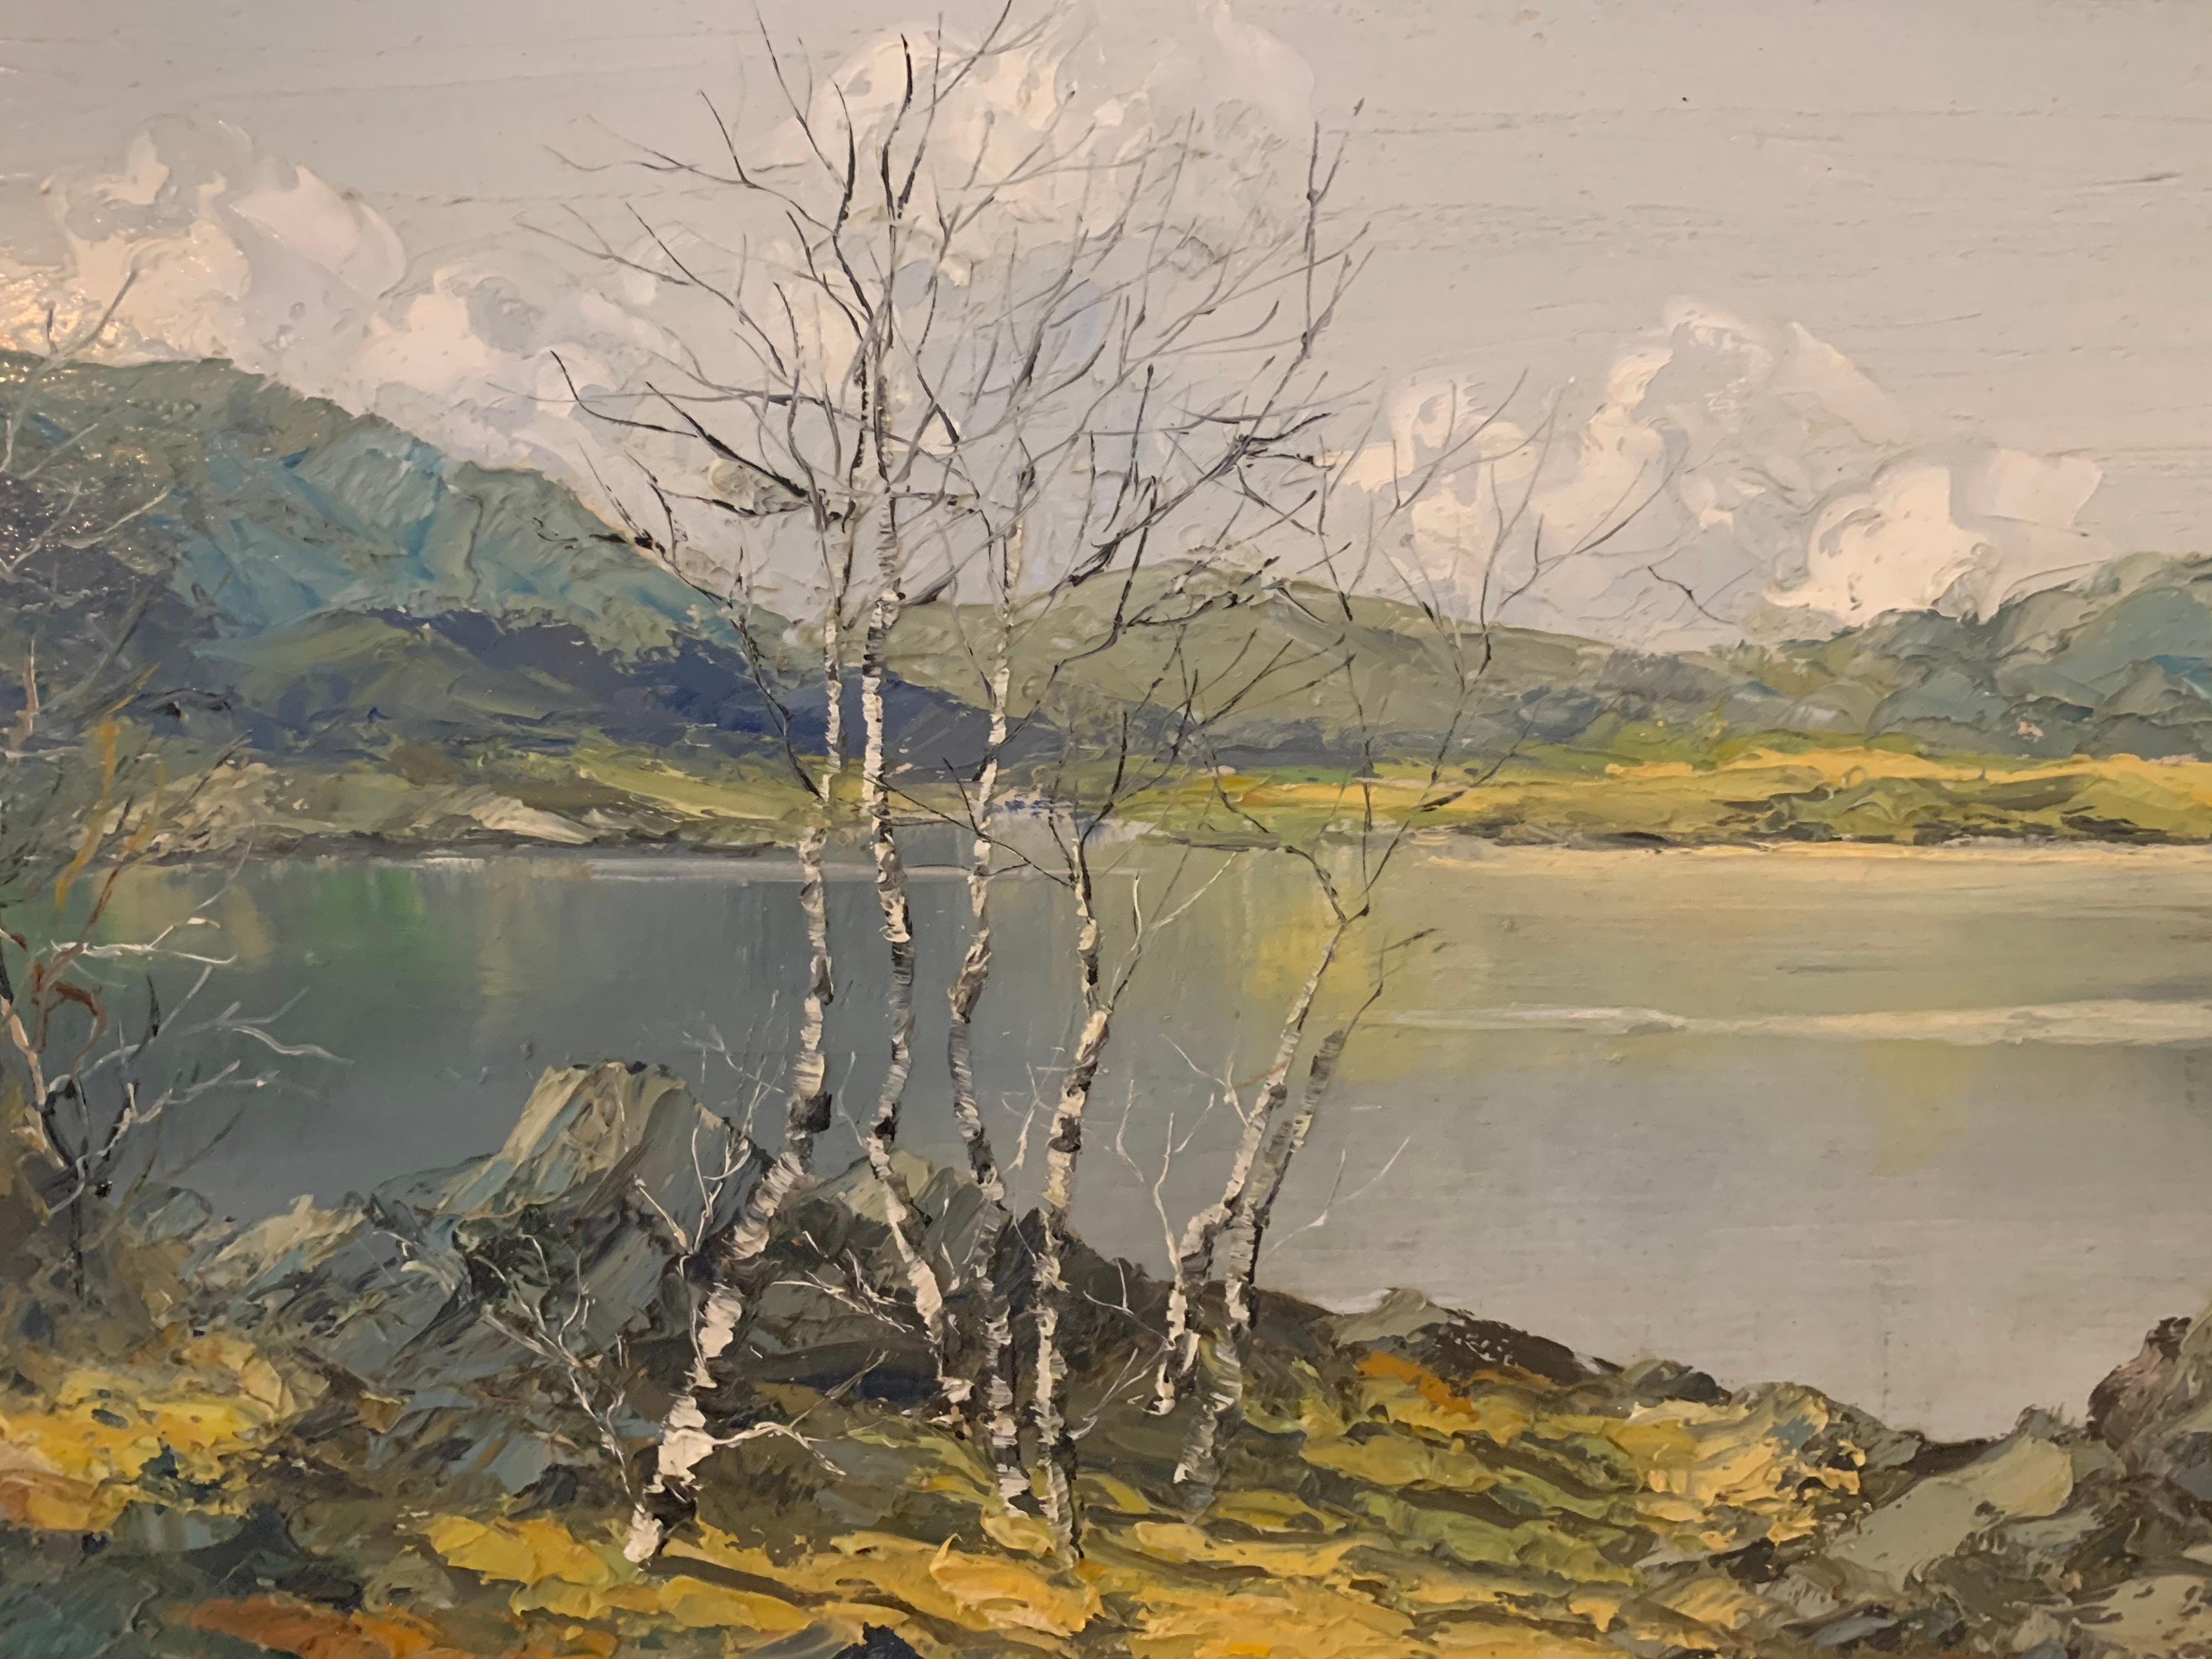 Oil Painting of Snowdon Mountains & Lakes in Wales by Modern British Artist For Sale 2